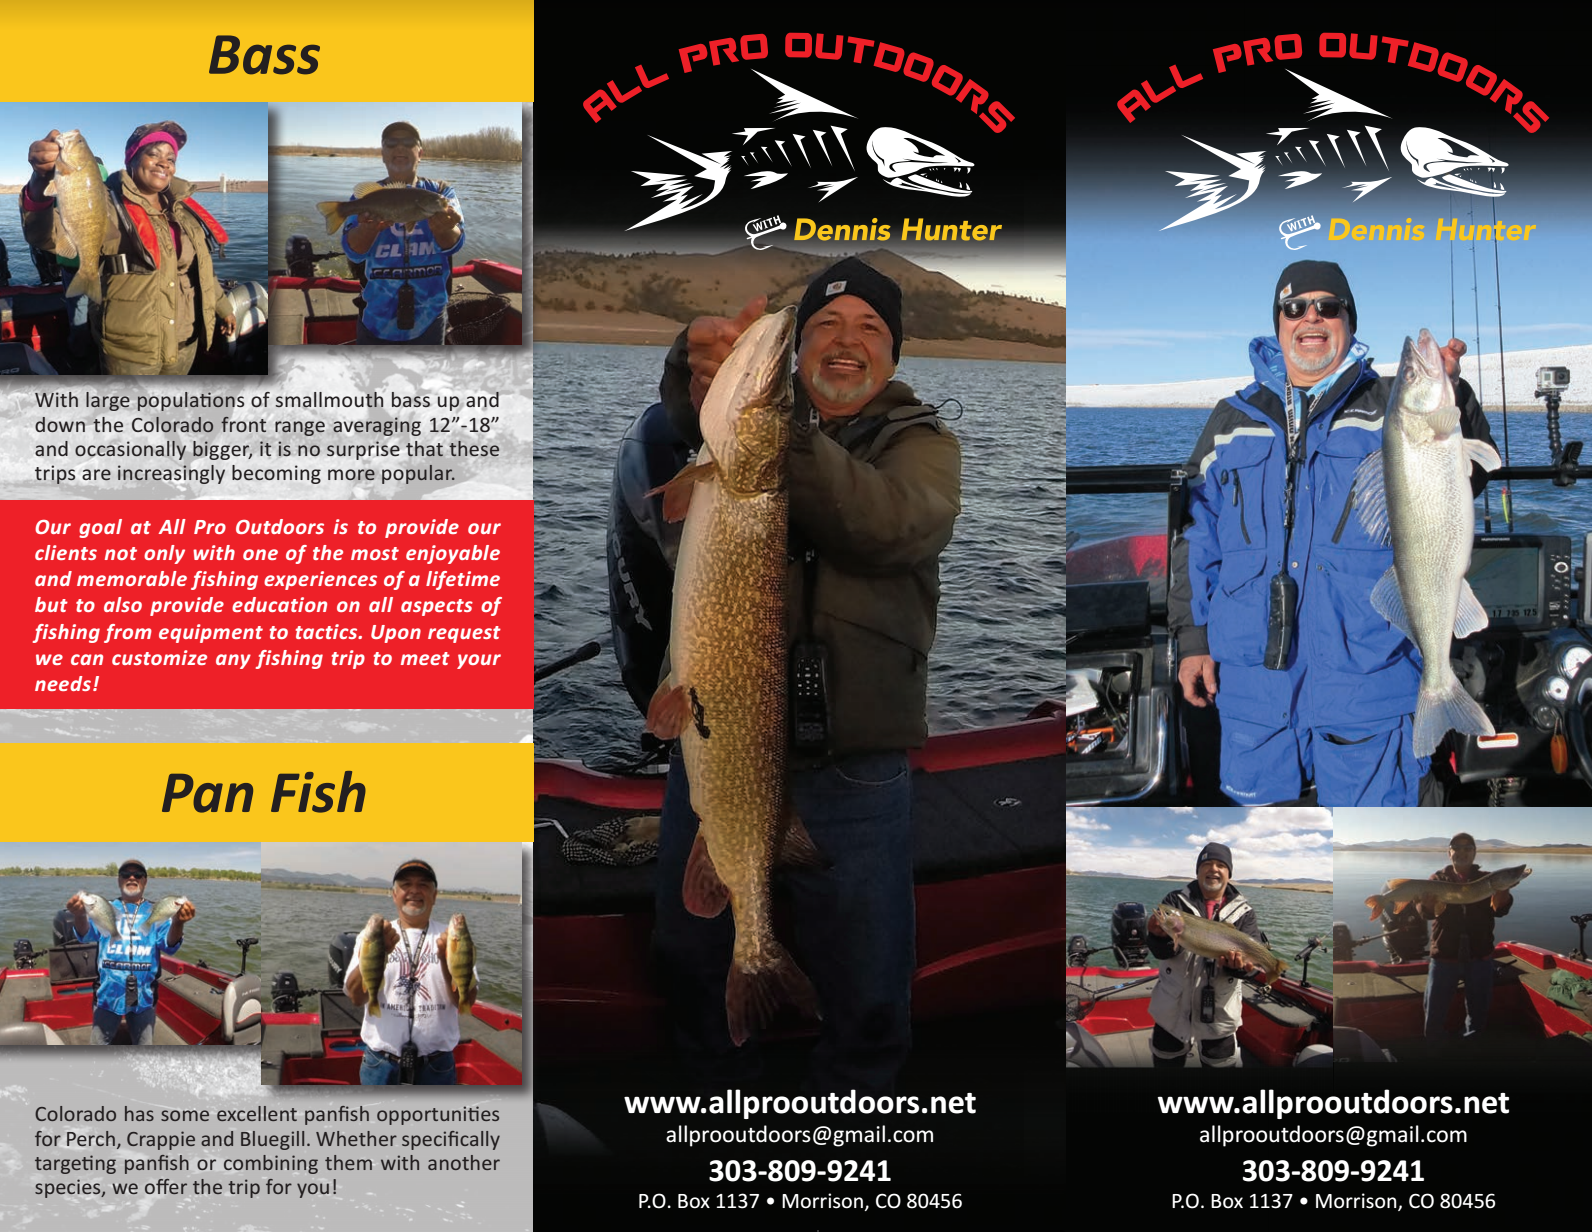 All Pro Outdoors with Dennis Hunter Trifold Brochure